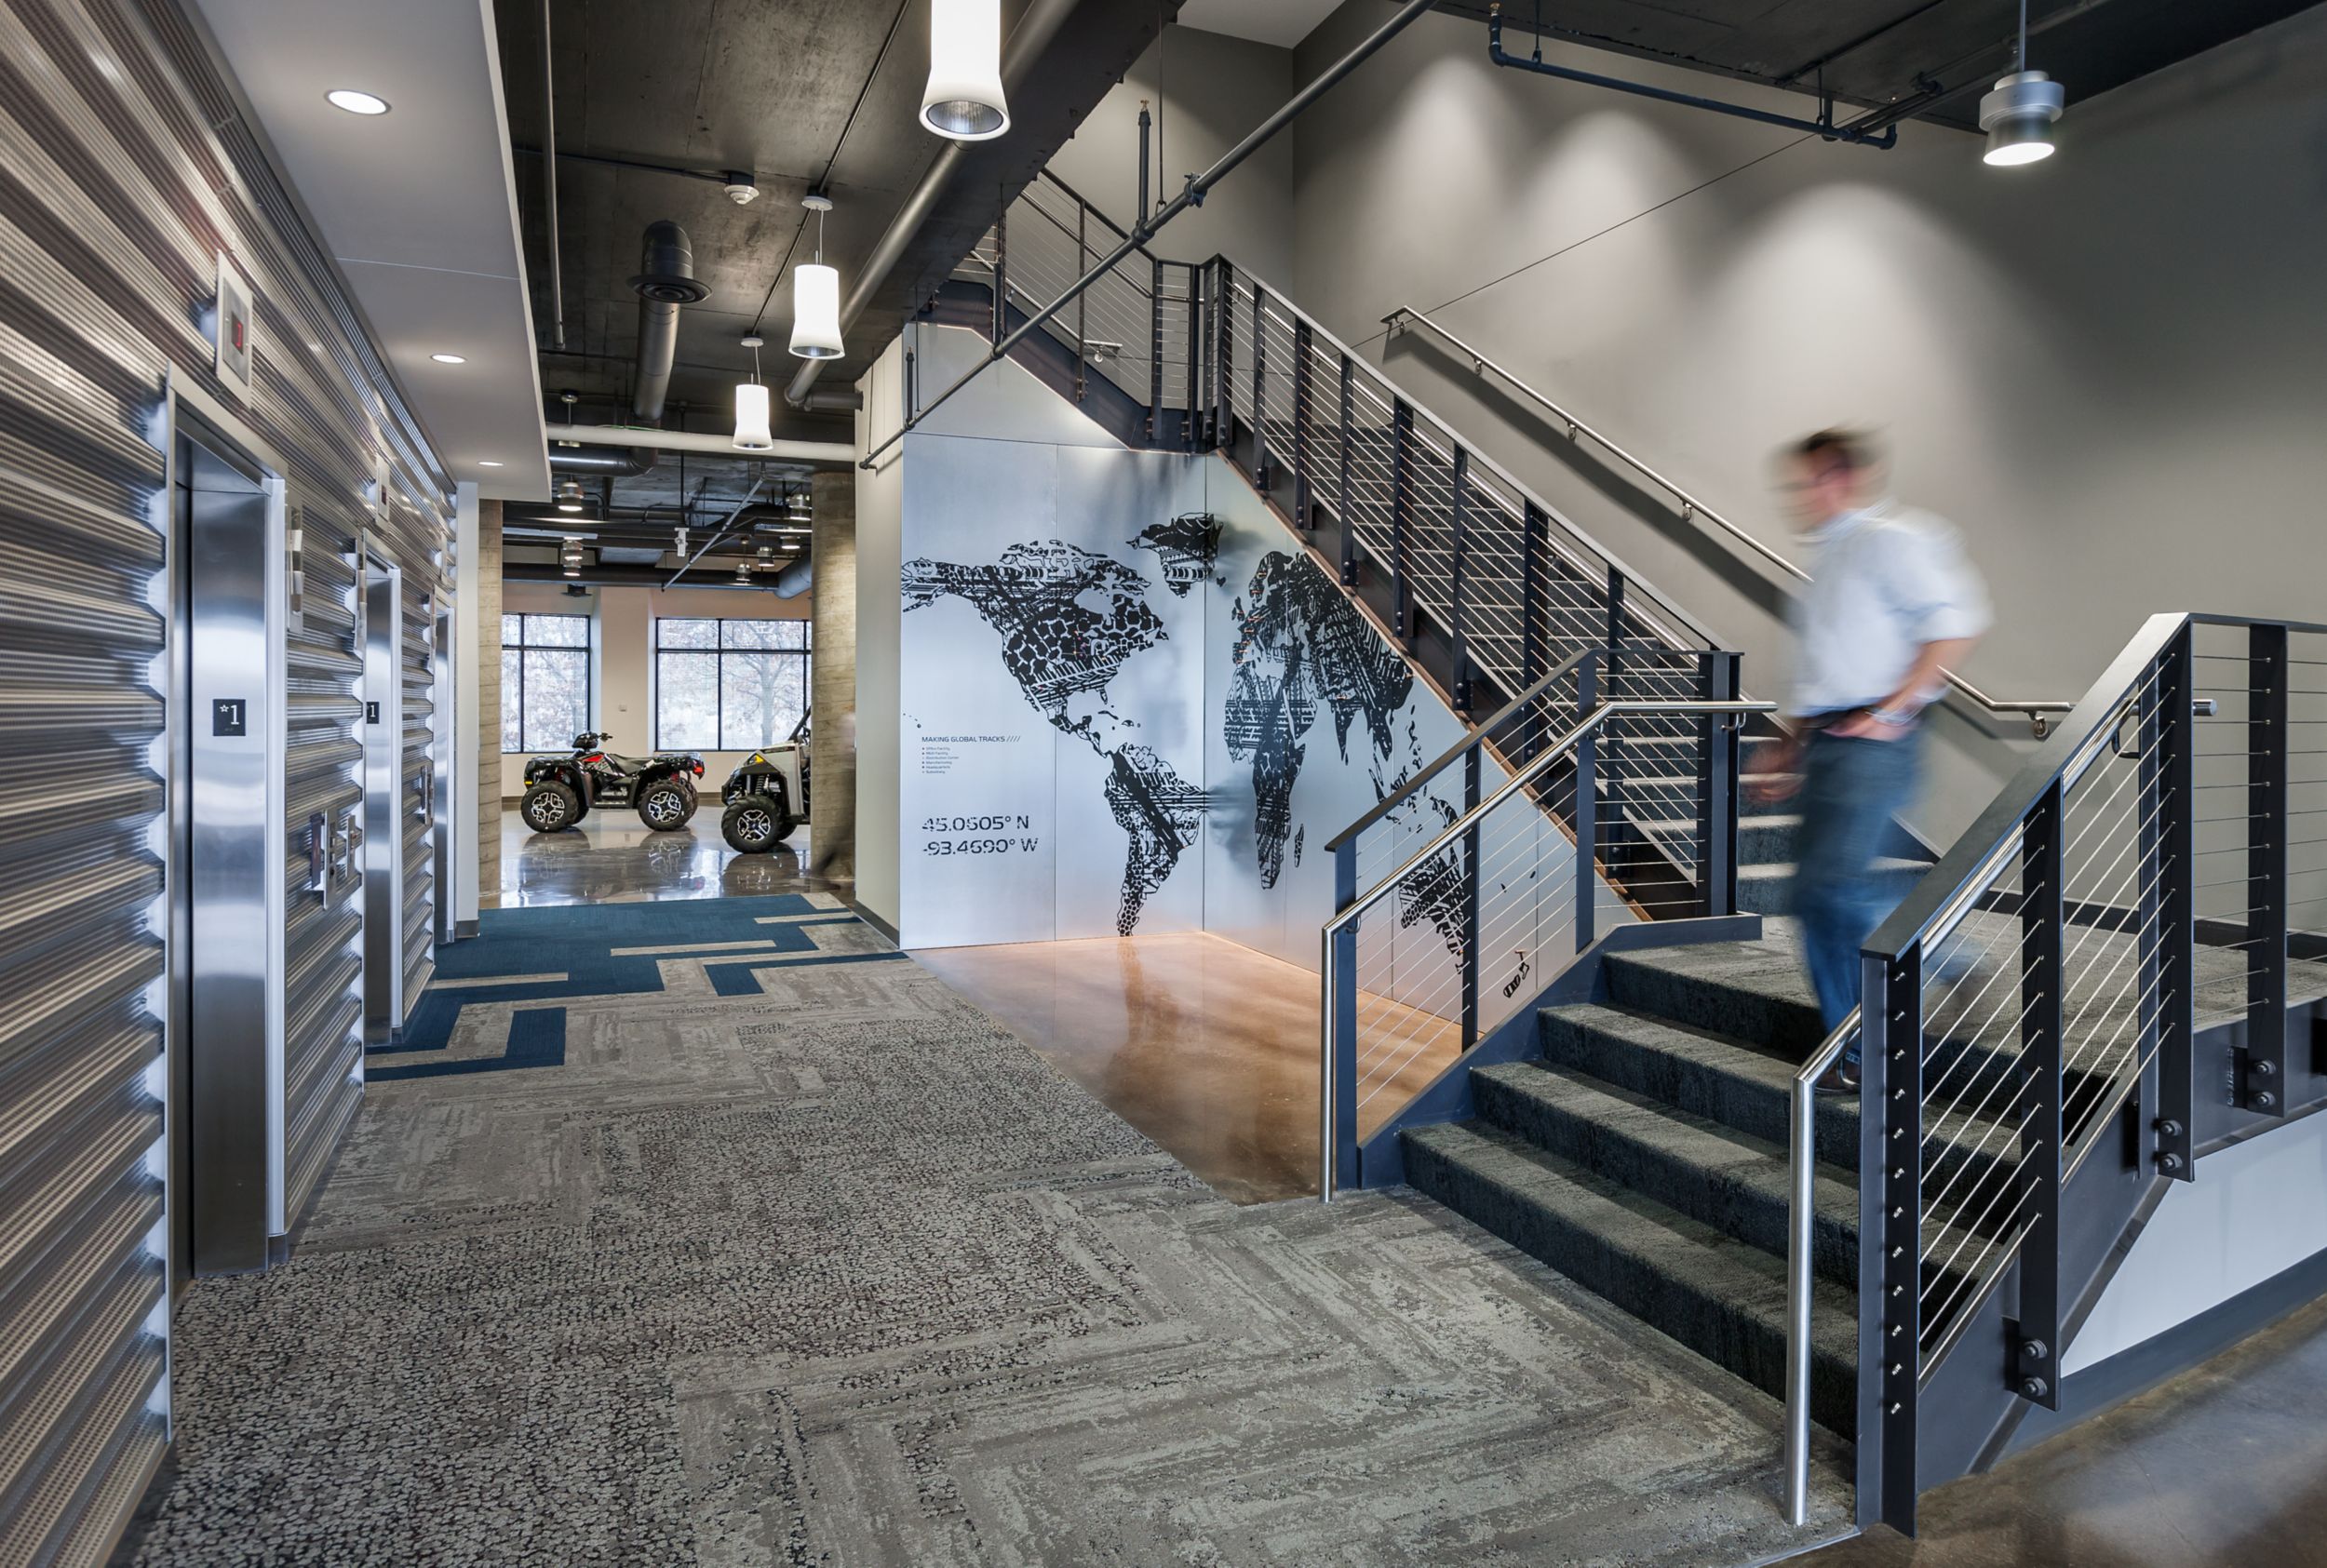 Interface HN810, HN820, HN840 and HN850 plank carpet tiles in open stairwell with four wheelers in background at Polaris Industries image number 10